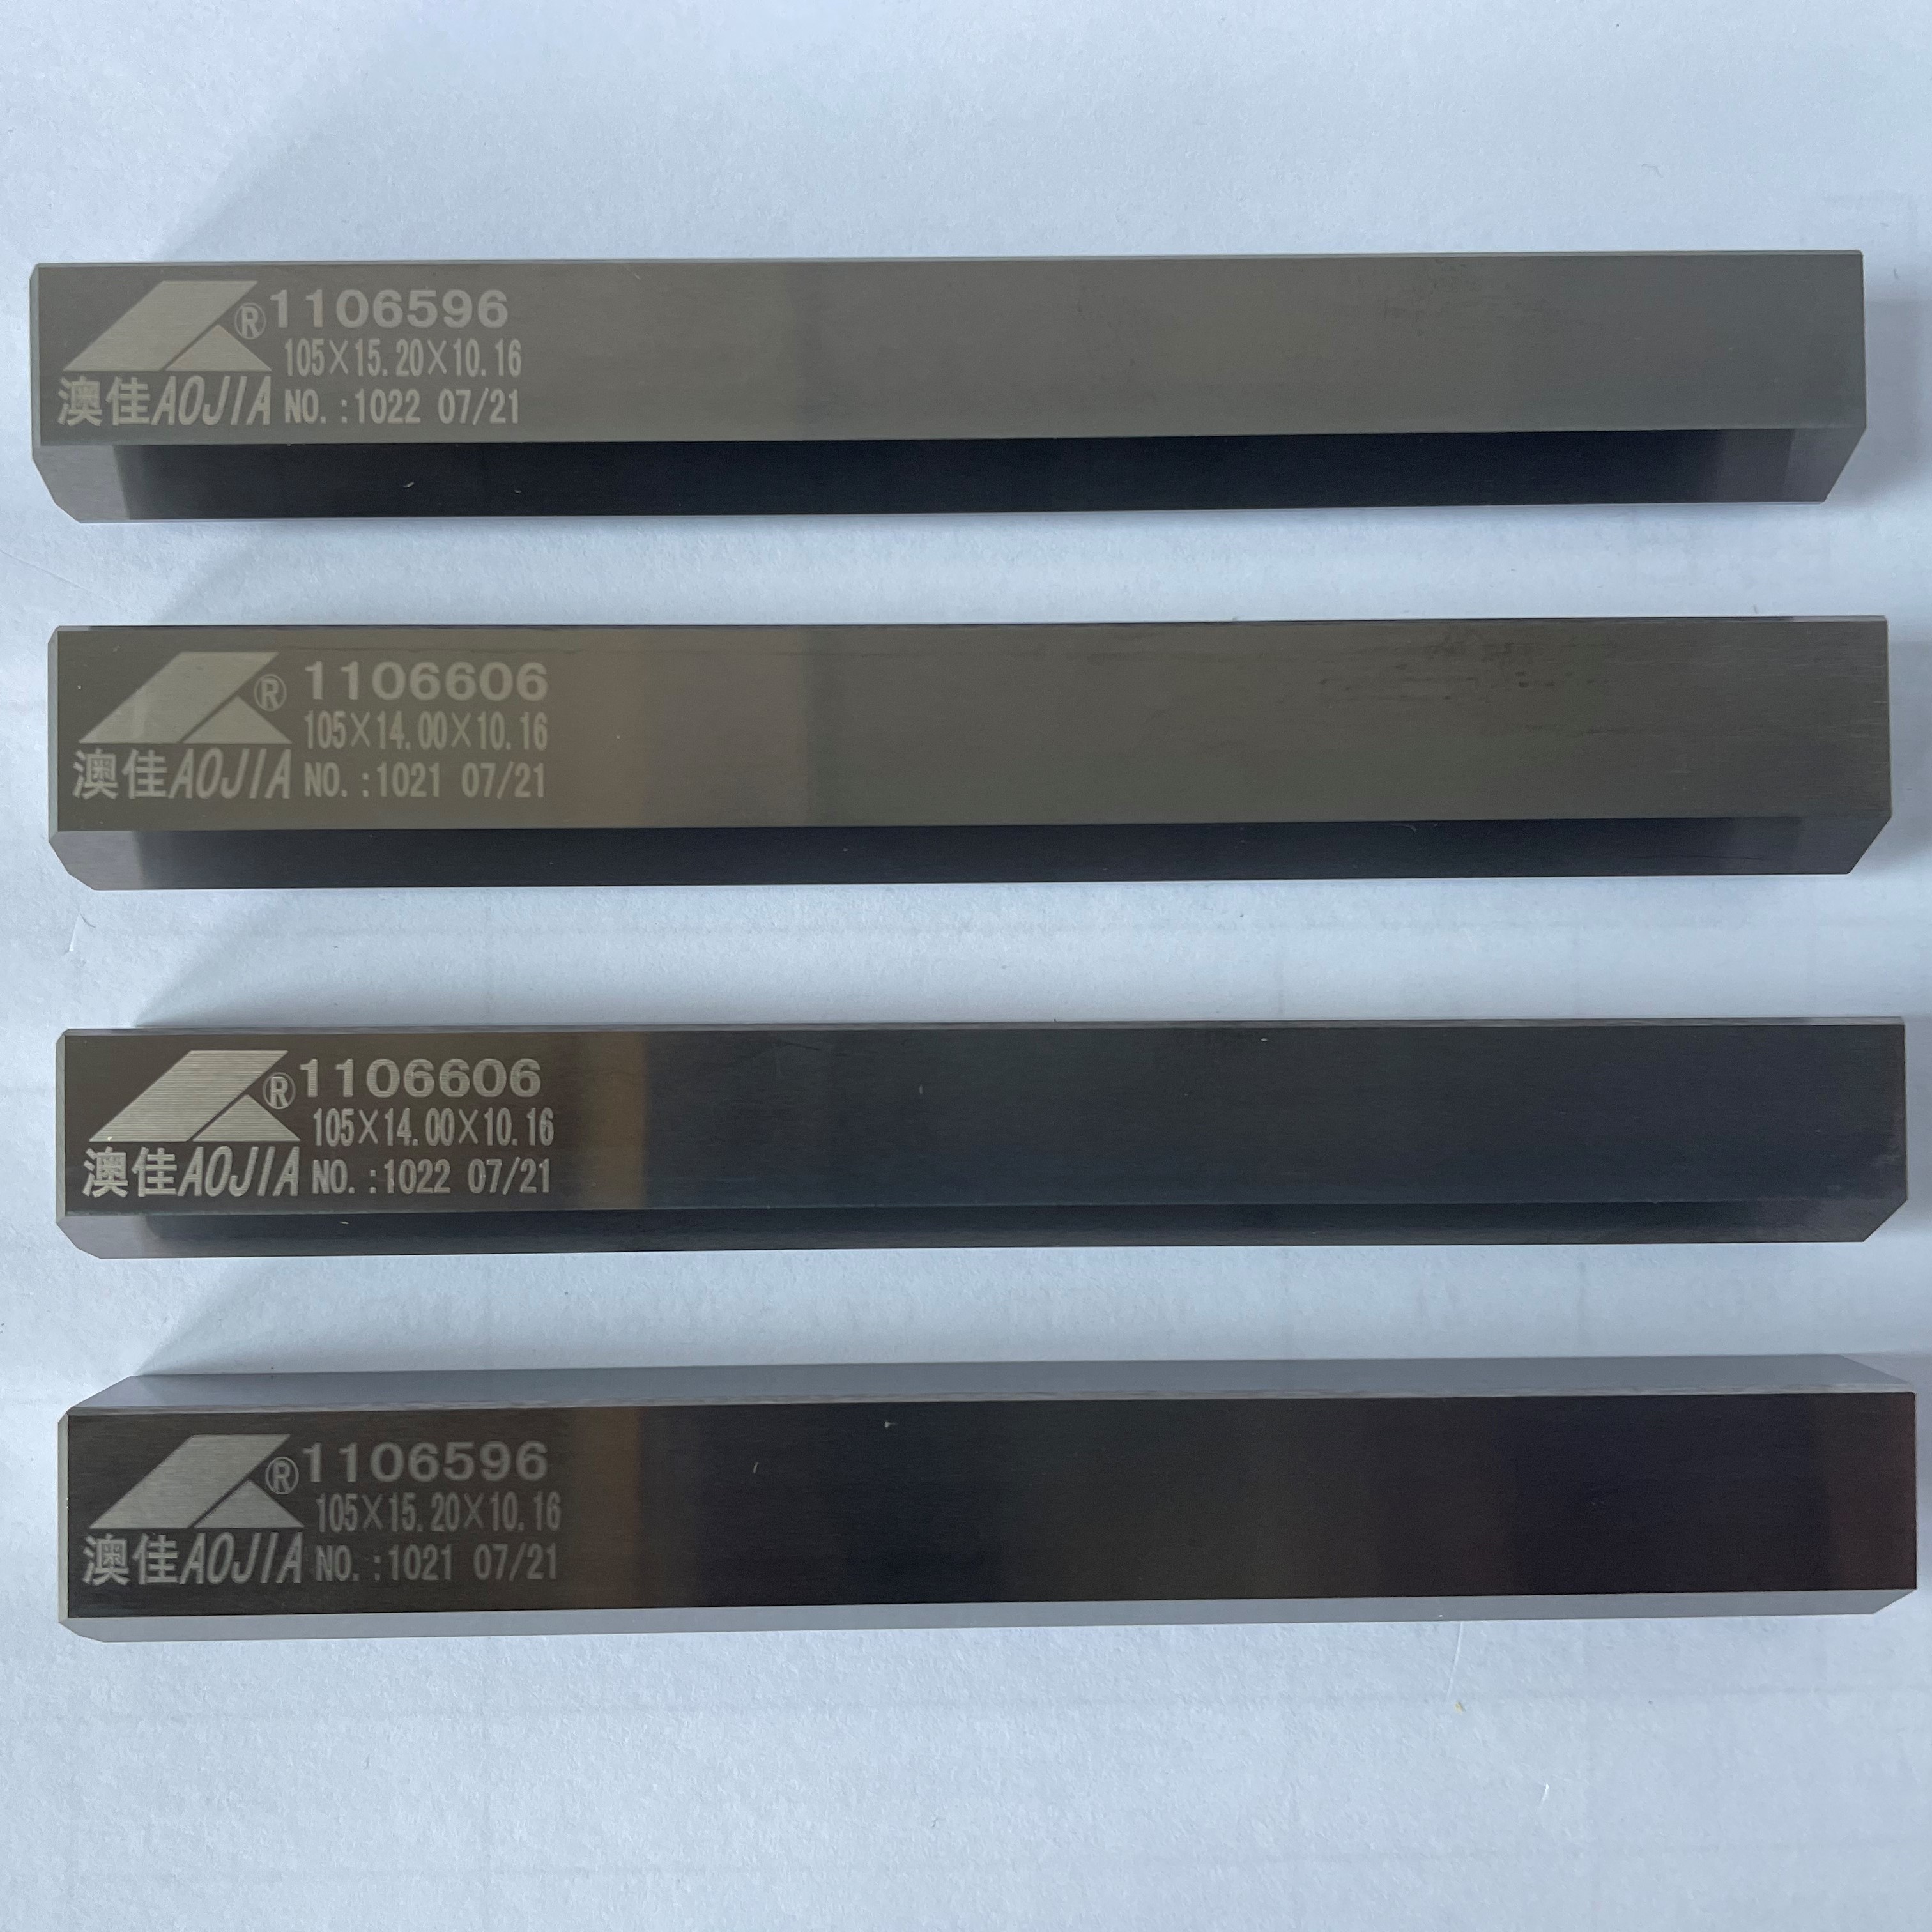 Wholesale AT AP Coated cemented Carbide Cutting Tools 105×15.20×10.16 Semi Finishing from china suppliers